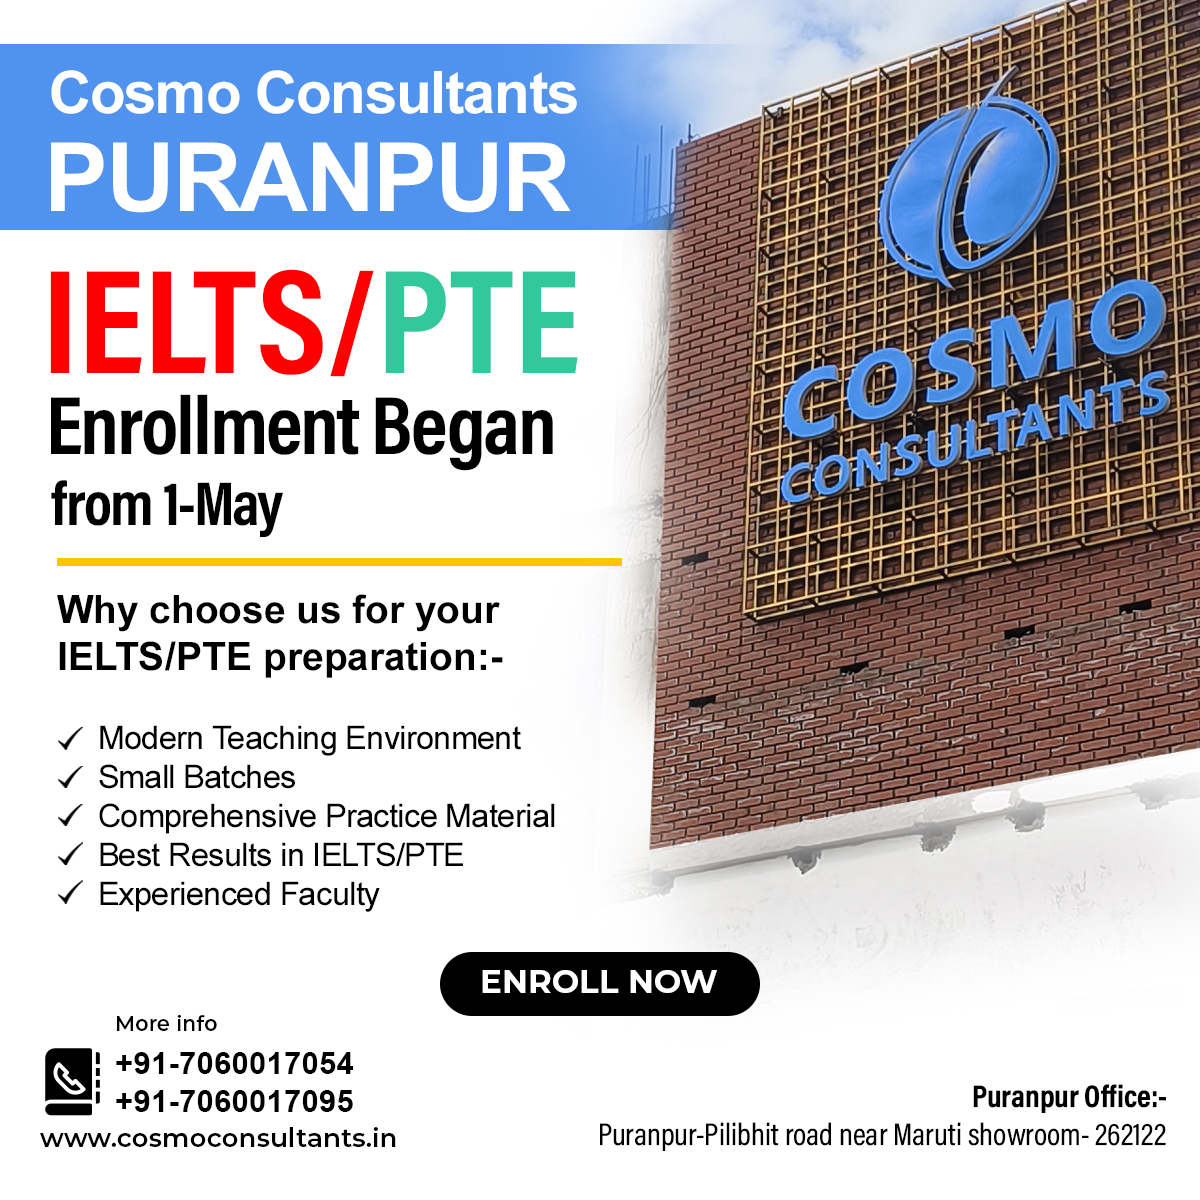 Admission process for #IELTS and #PTE #classes has begun at #CosmoConsultantsPuranpur ! Secure your seat now and embark on your journey towards exam success. Enroll today to kickstart your language proficiency journey! More information: 7060017054, 7060017095. #CosmoConsultants